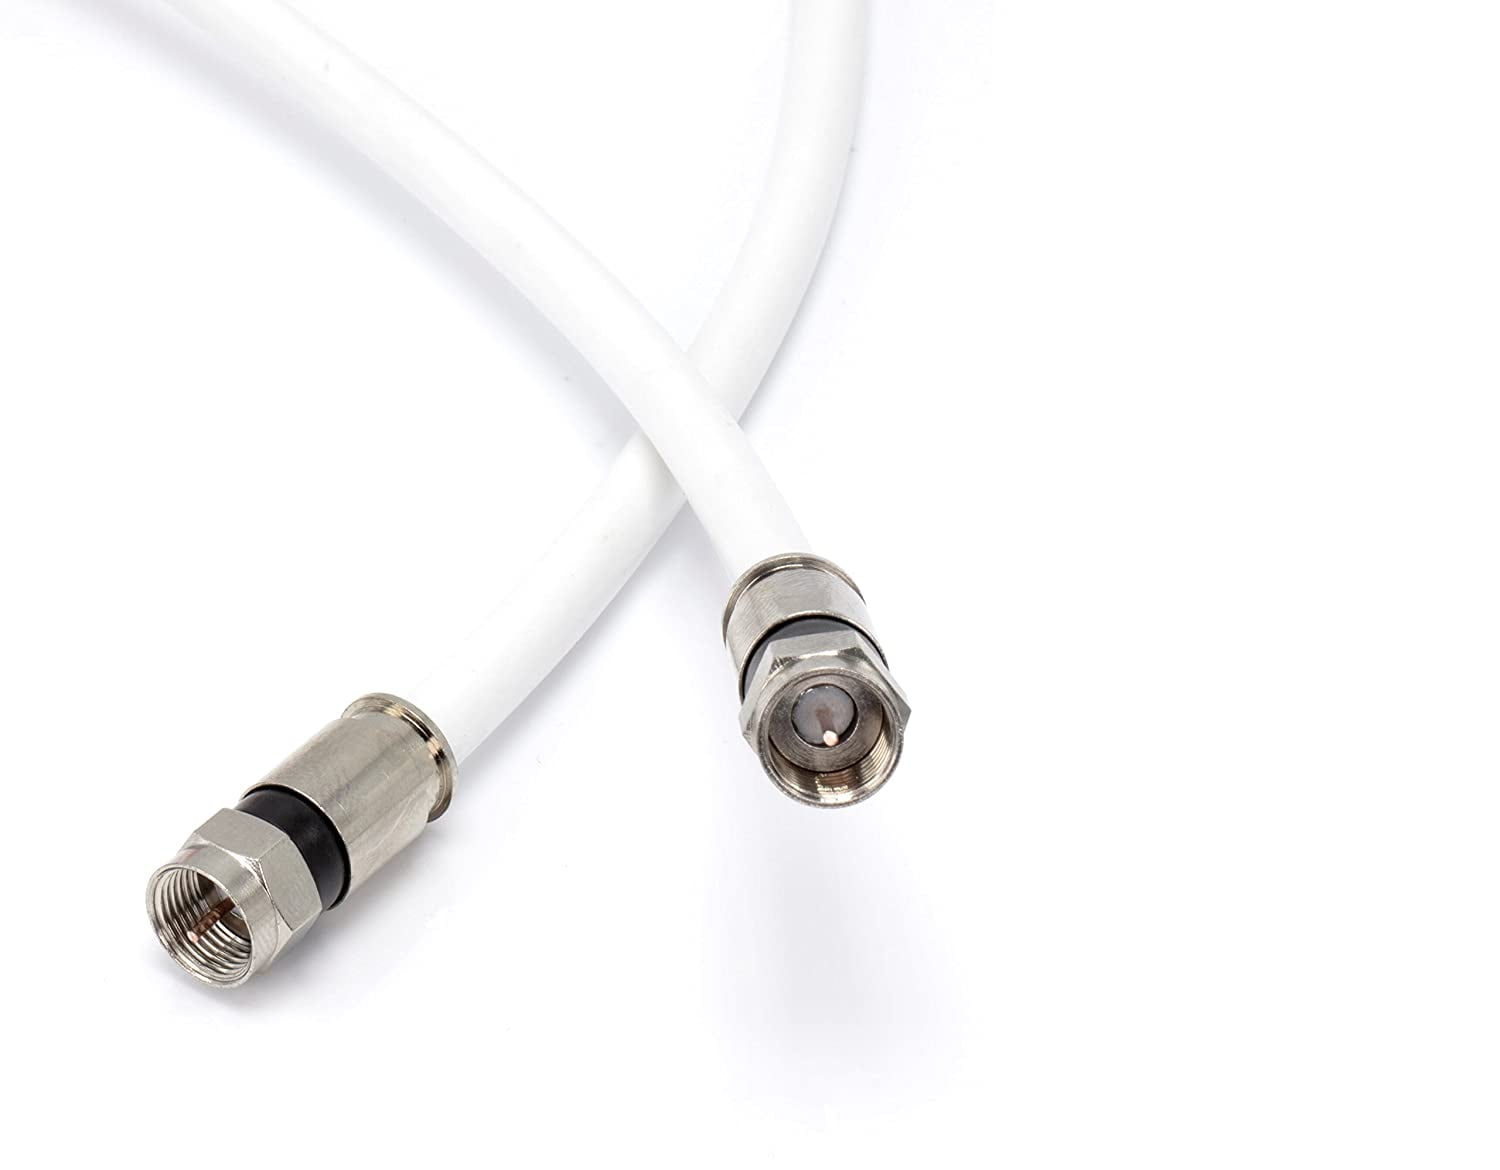 75' Feet, White RG6 Coaxial Cable (Coax Cable) with Weather Proof  Connectors, F81 / RF, Digital Coax - AV, Cable TV, Antenna, and Satellite,  CL2